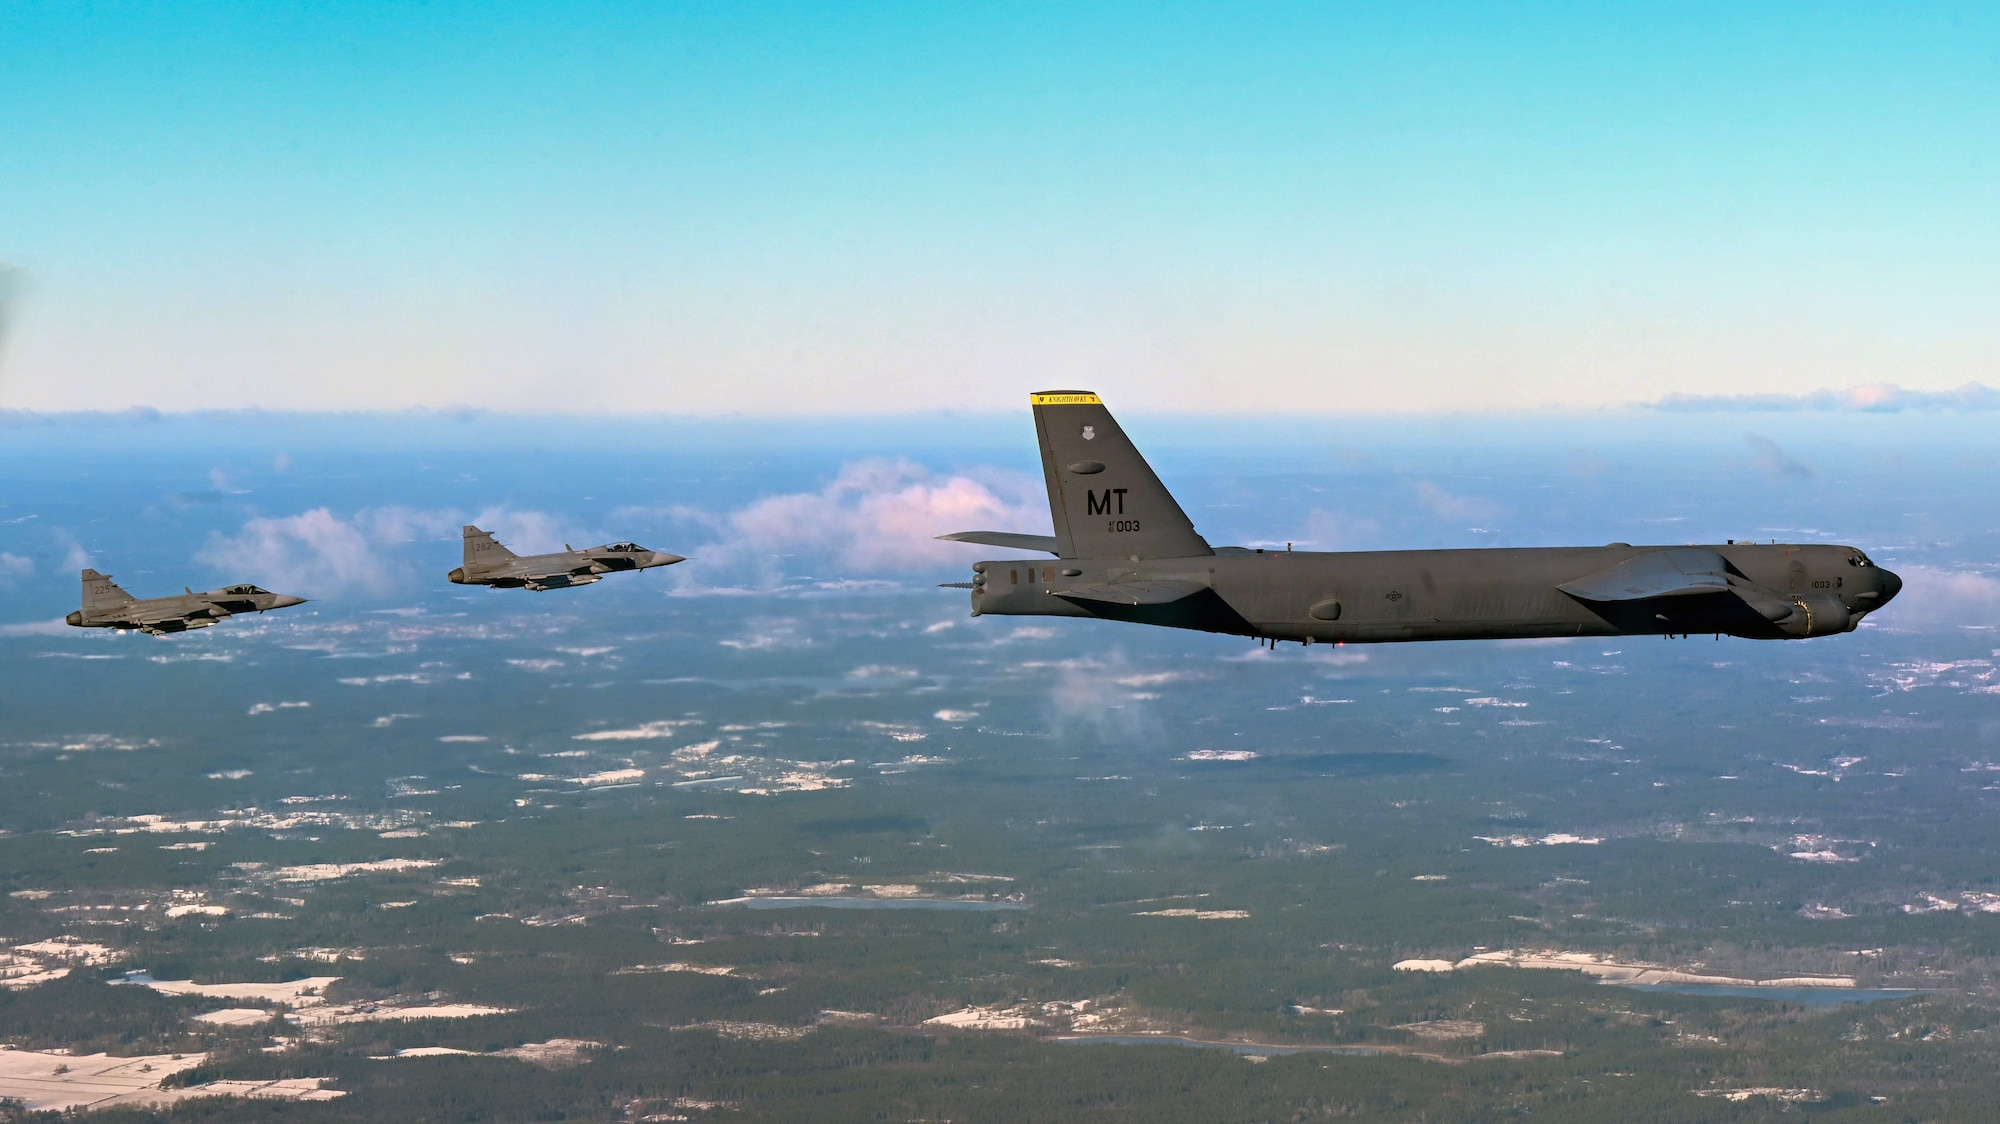 A B-52H Stratofortress from the 69th Expeditionary Bomb Squadron at RAF Fairford, United Kingdom is escorted by two Swedish Saab JAS 39 Gripens